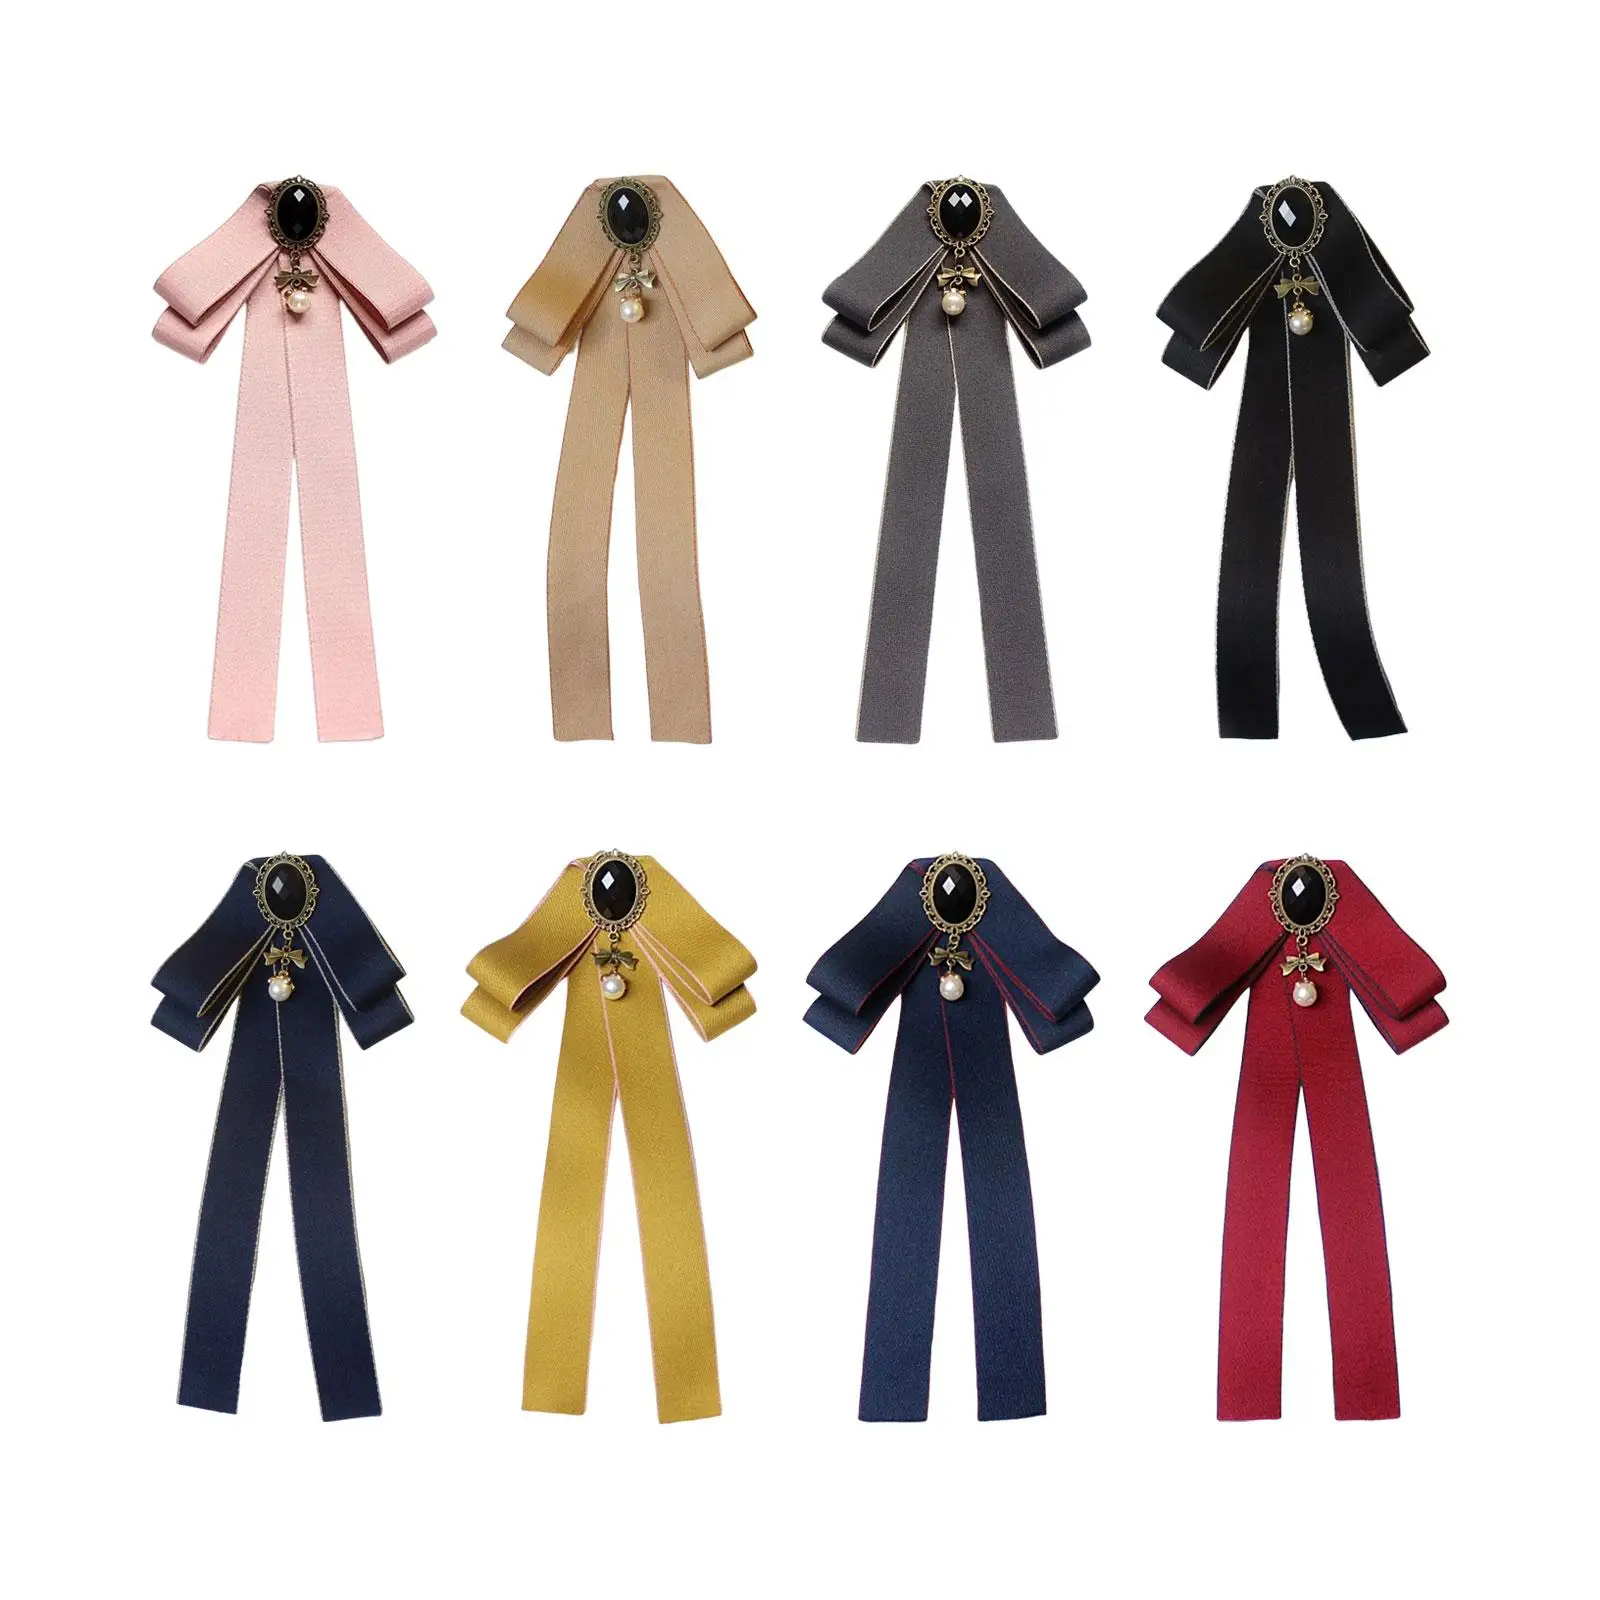 Ribbon Bow Tie Brooch Elegant Ribbon Brooches Neckties Bowties Bowknot Brooch Pin Neck Tie for Female Shirt Cocktails Lady Party